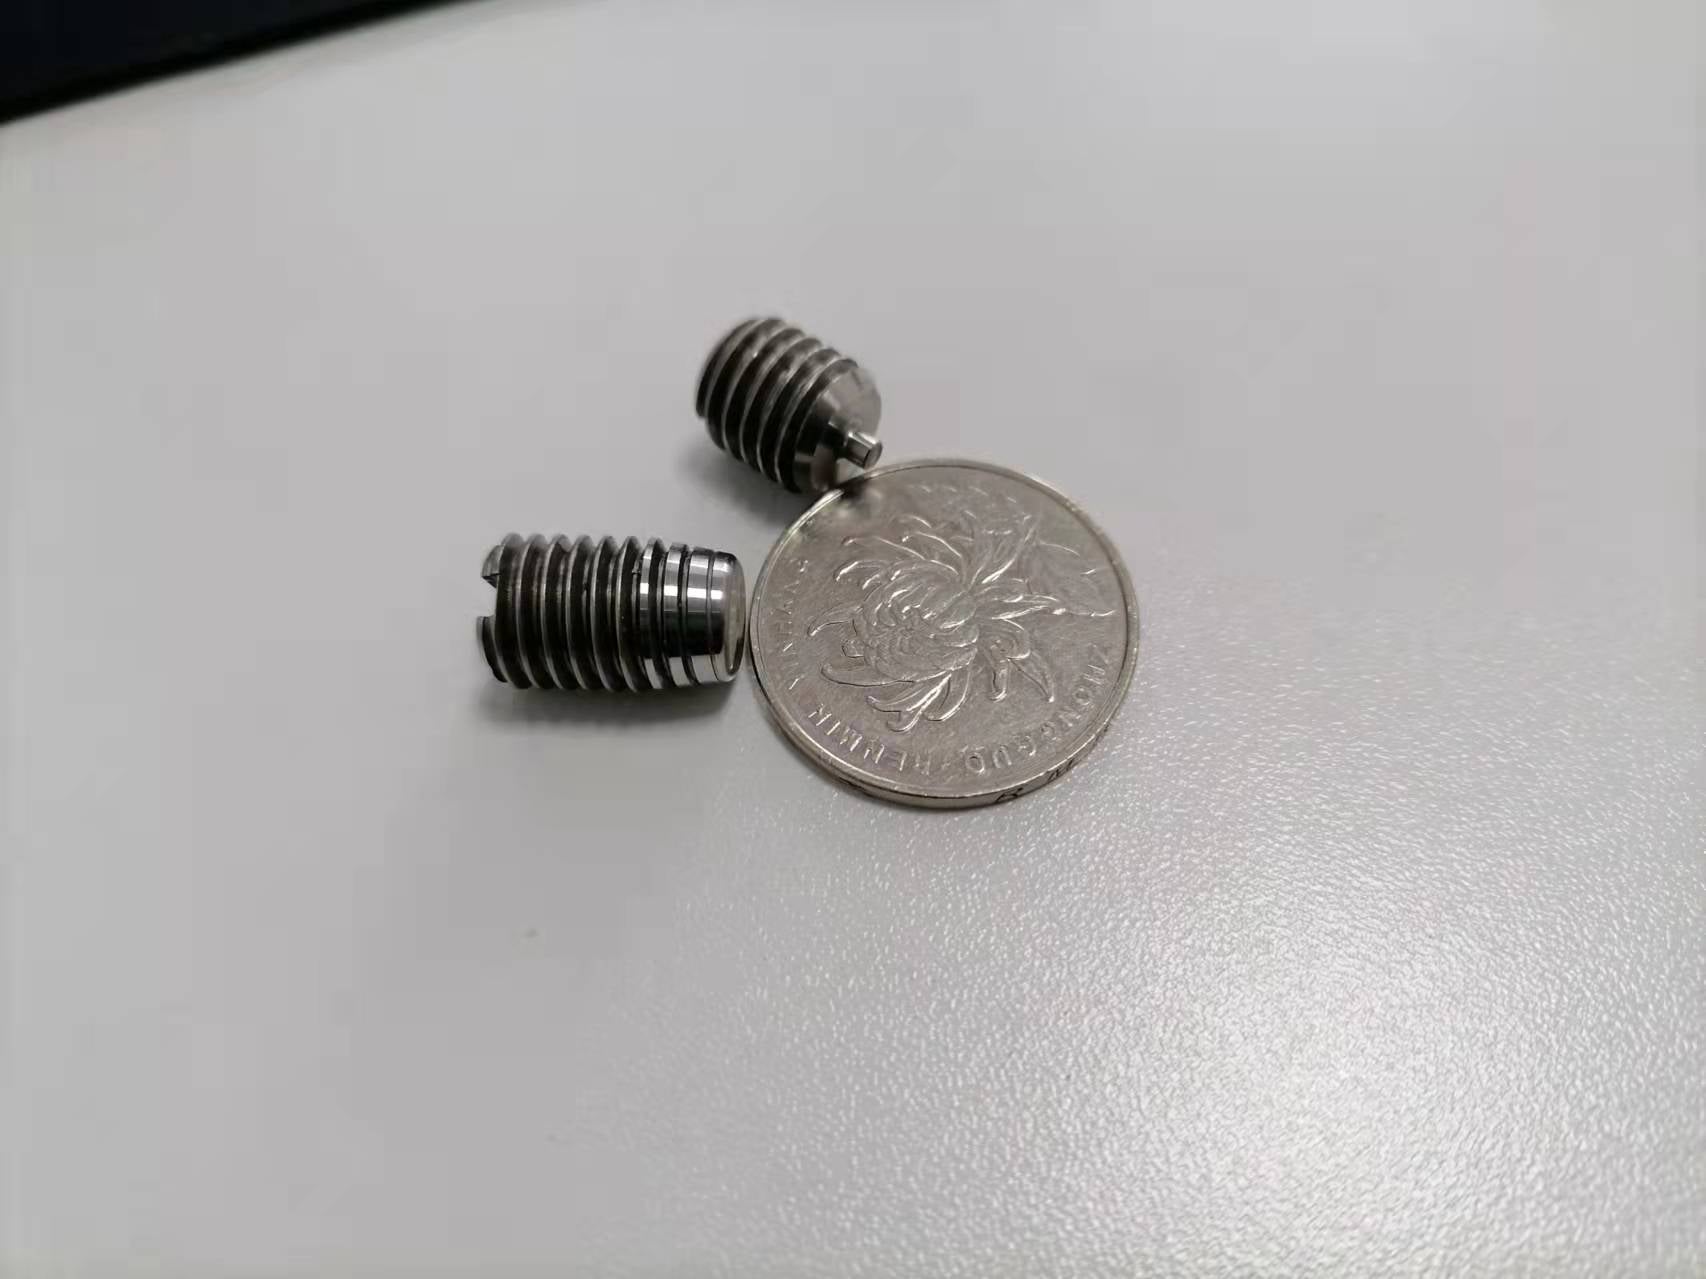 screw options for folding control box, coin for scale